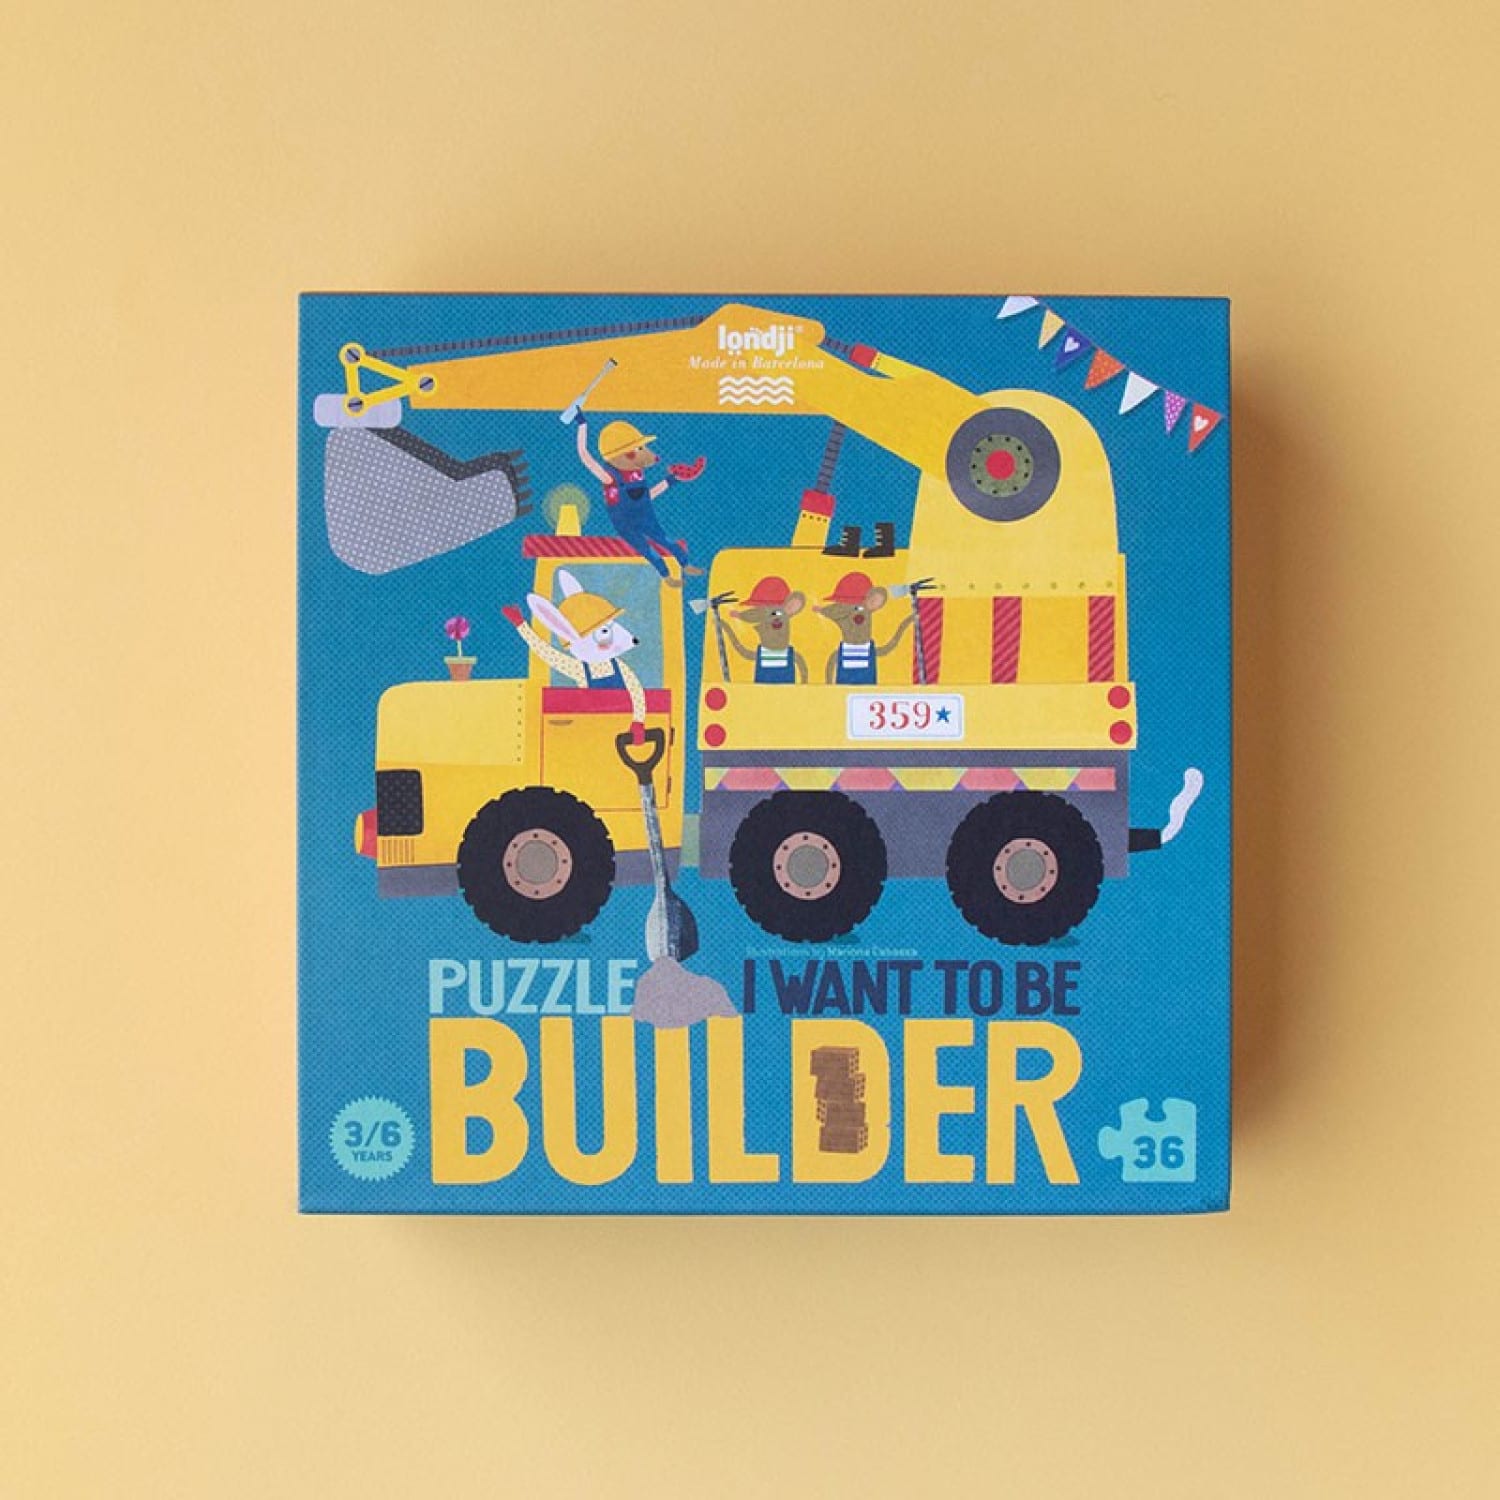 Puzzle – I Want To Be … Builder